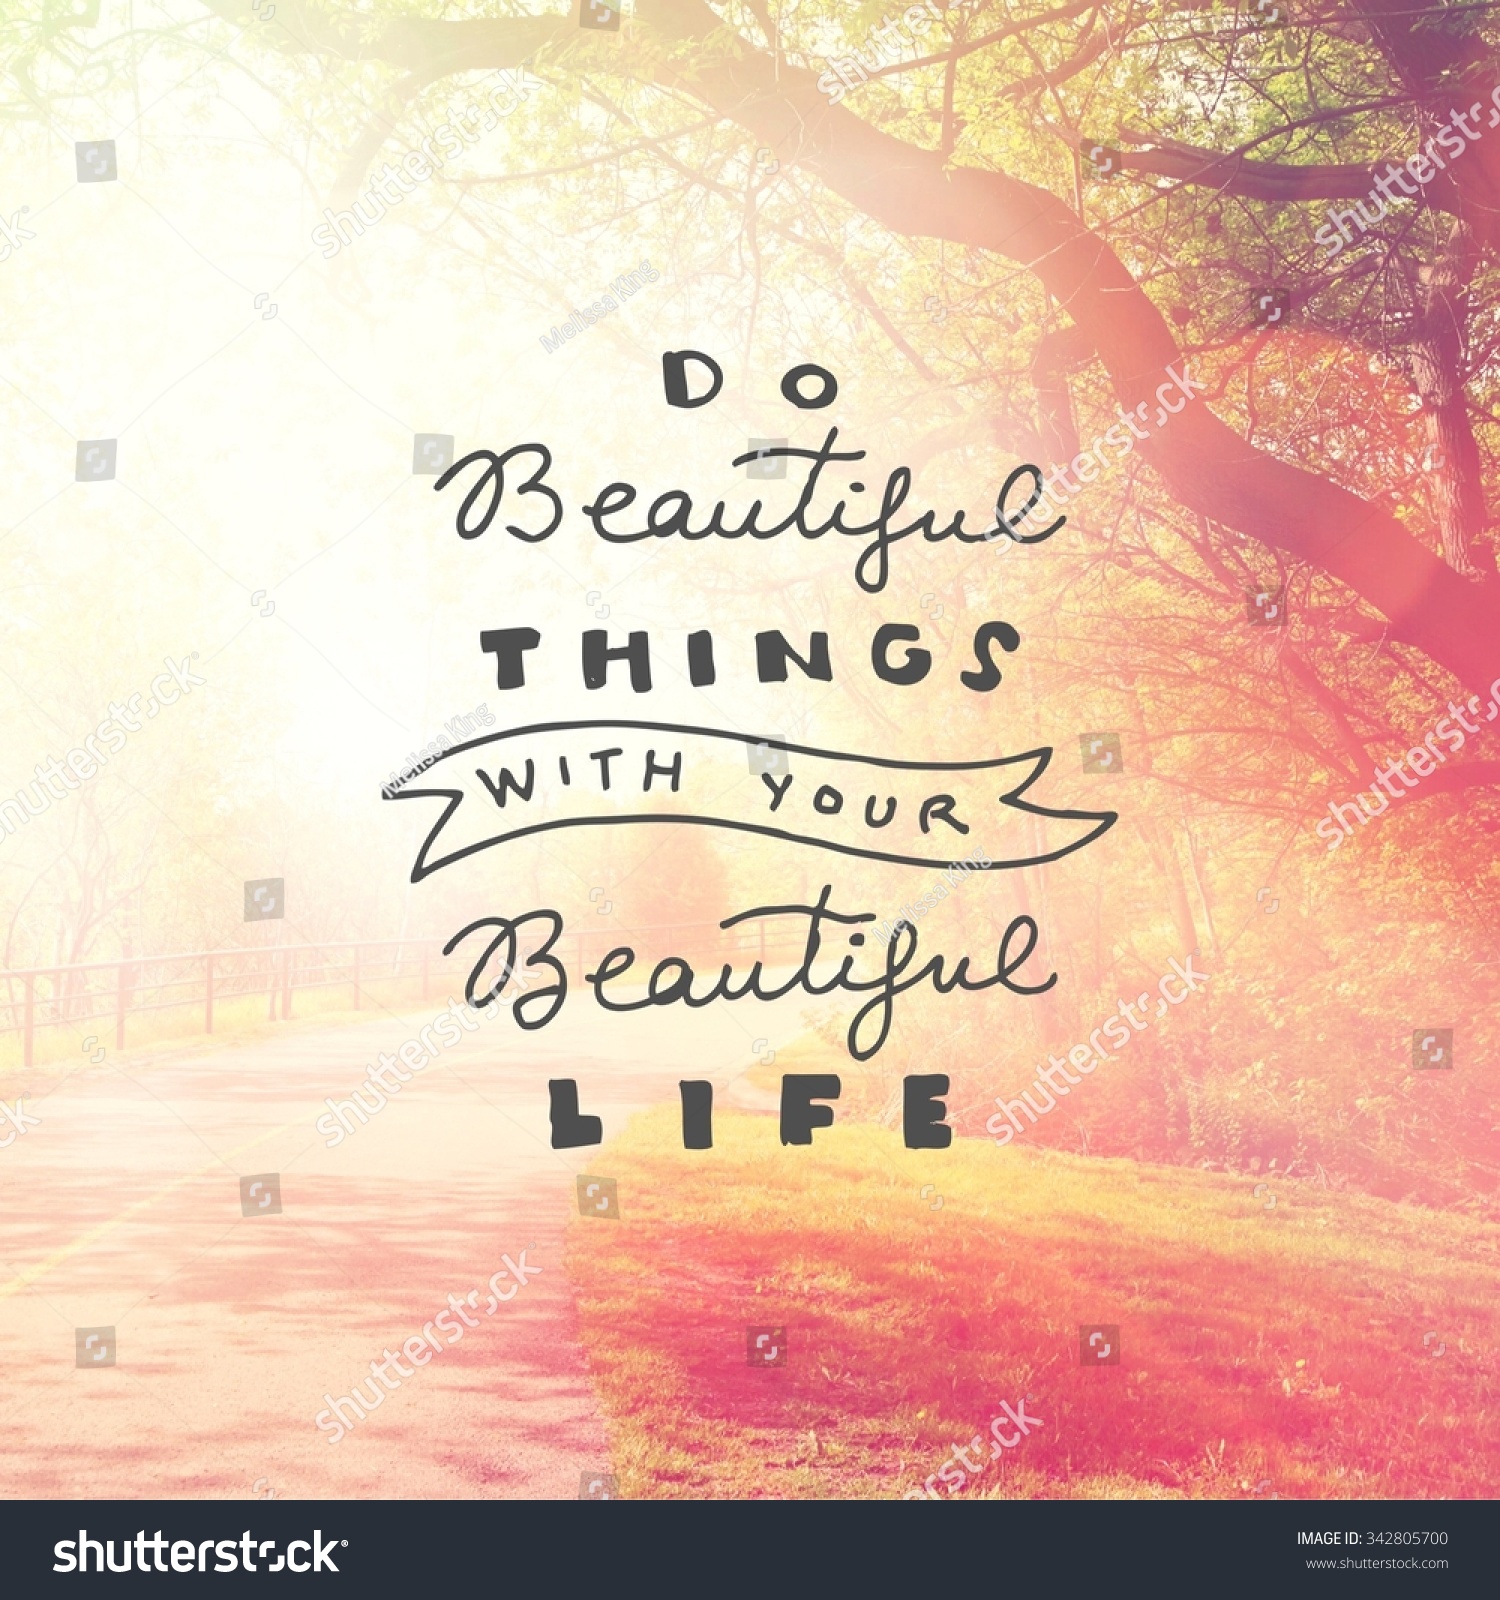 Inspirational Typographic Quote Do beautiful things with your beautiful life